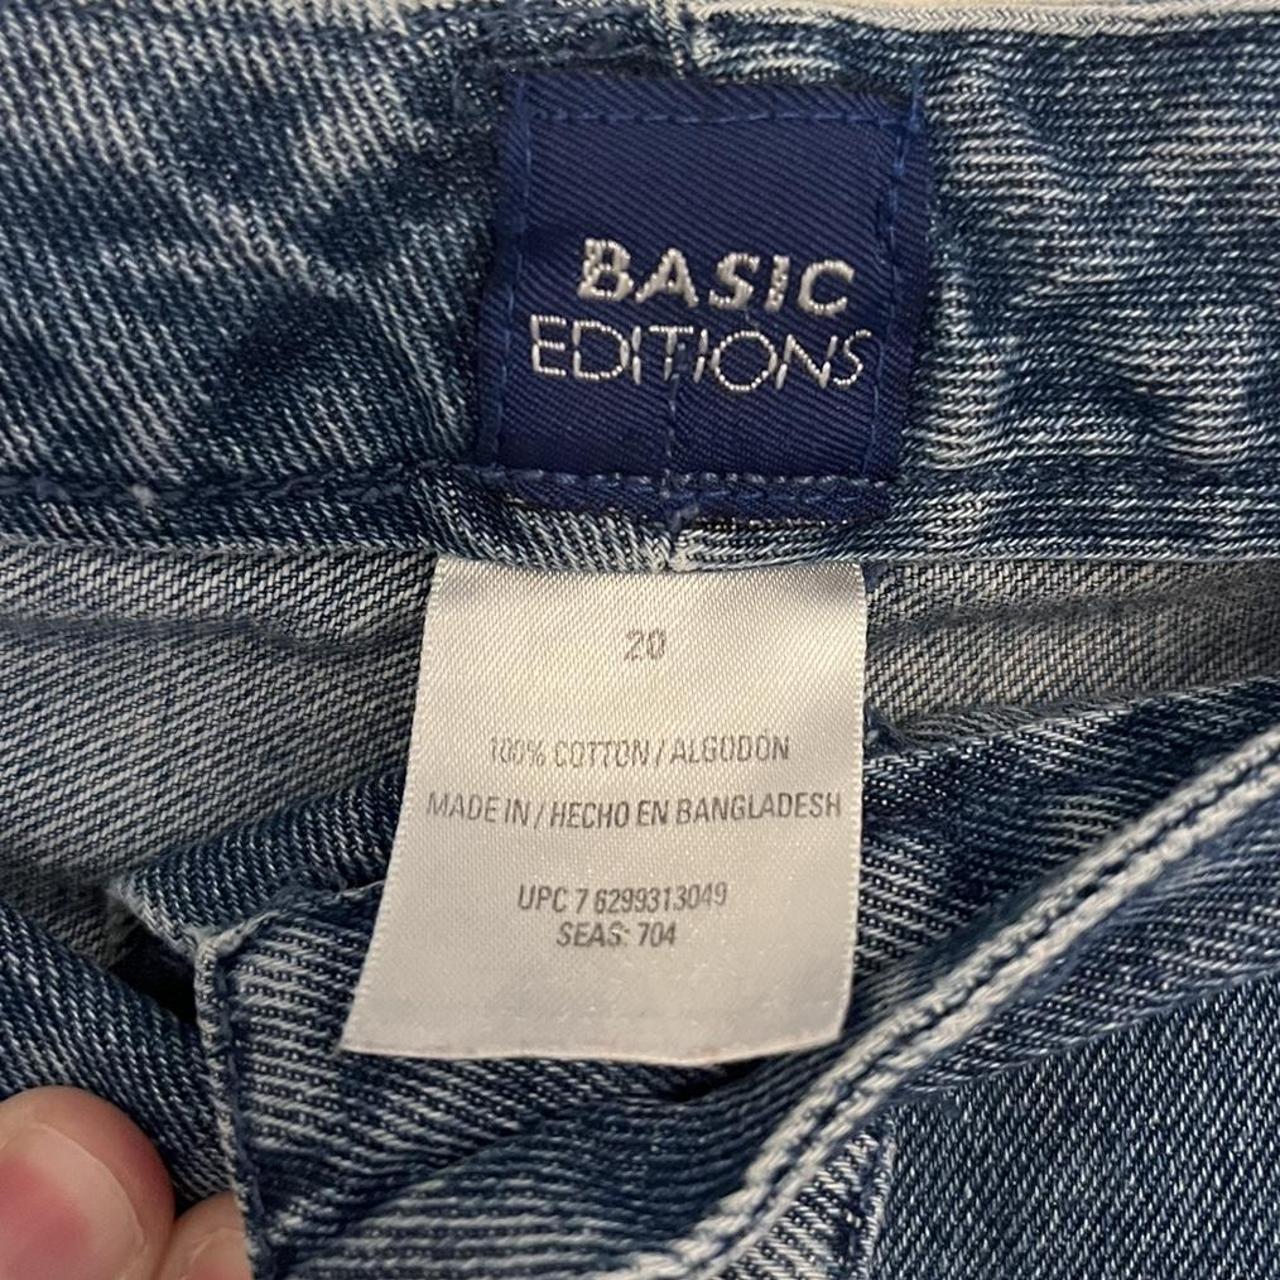 Basic Editions Jeans